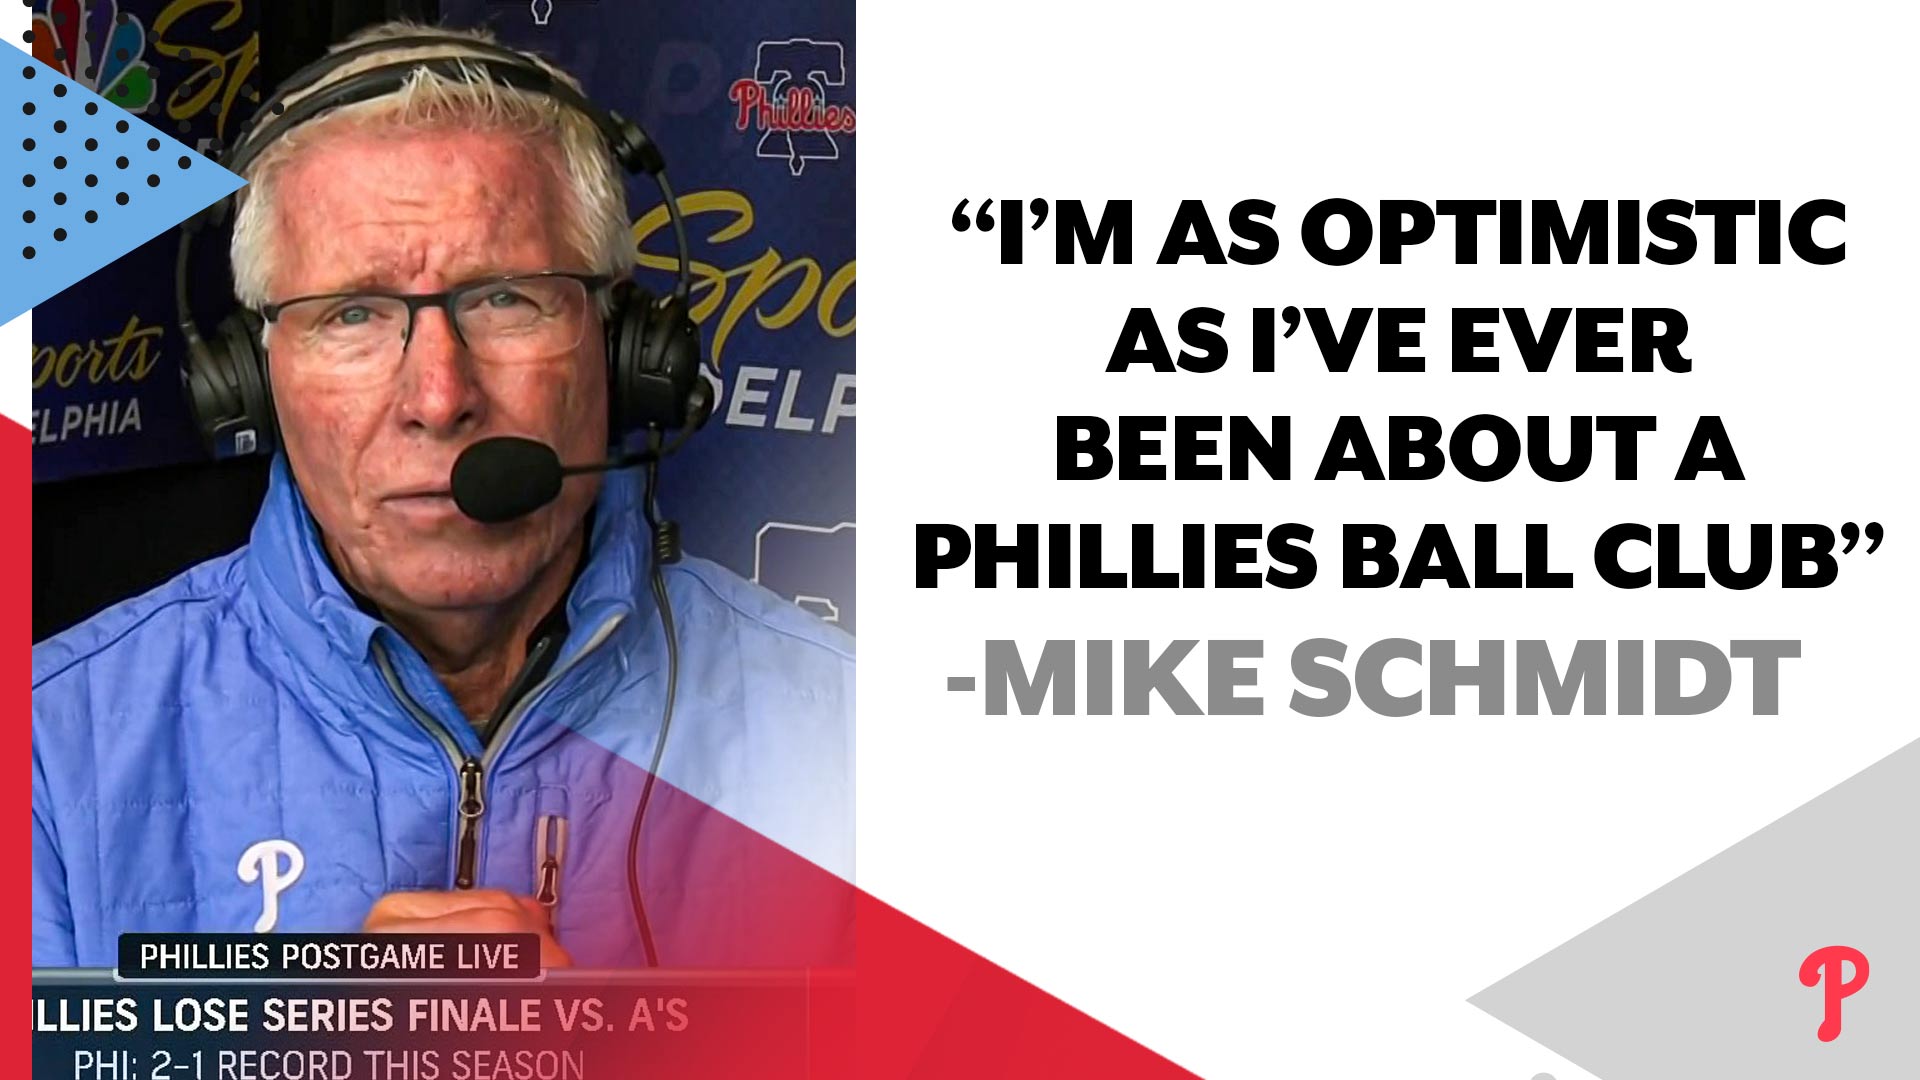 Even after the loss, Mike Schmidt has very high expectations – NBC